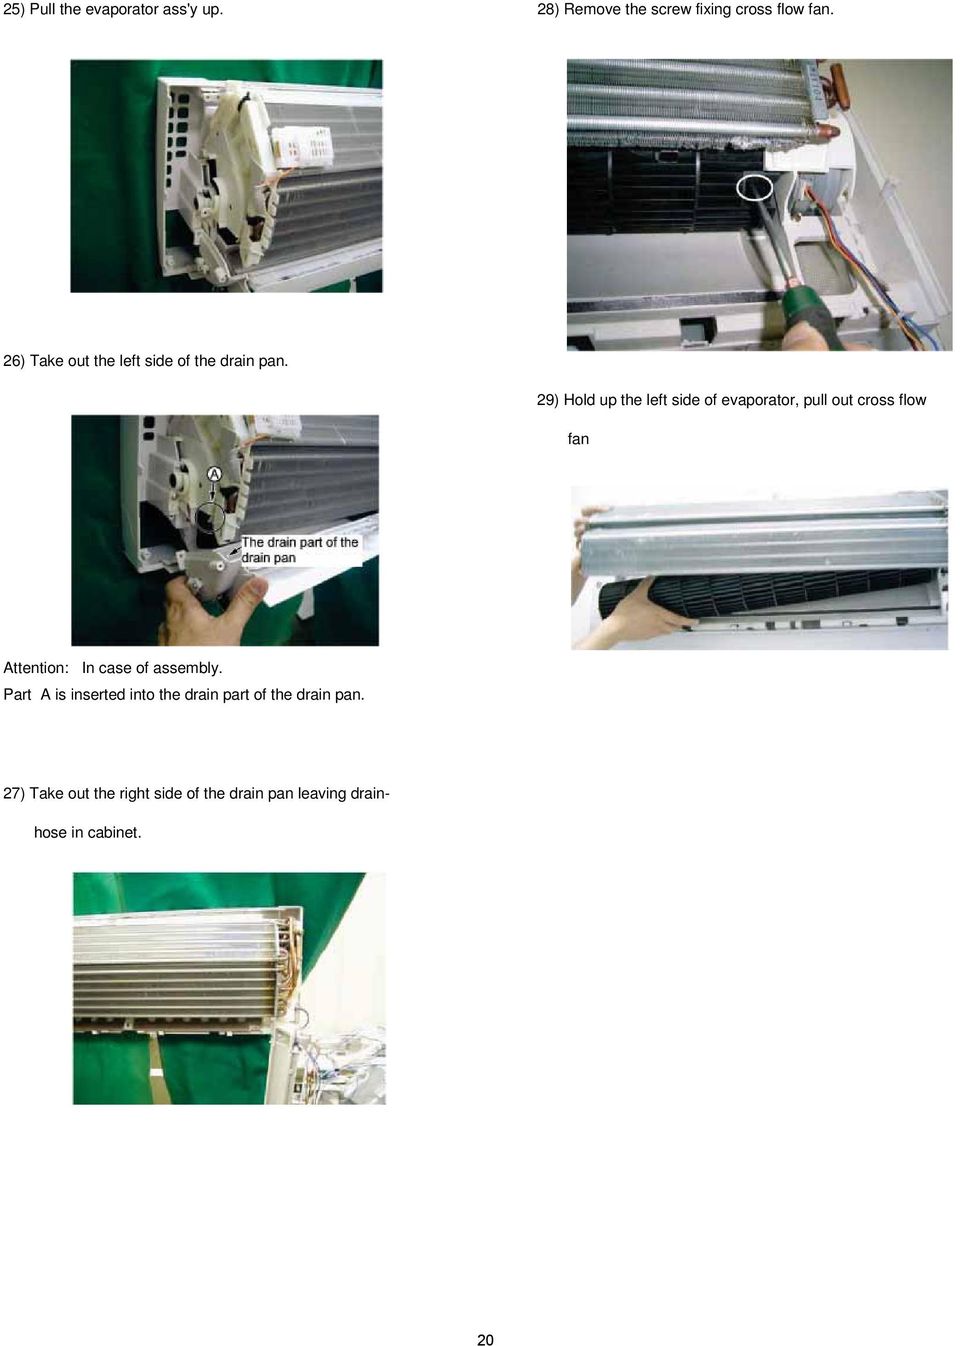 29) Hold up the left side of evaporator, pull out cross flow fan Attention: In case of